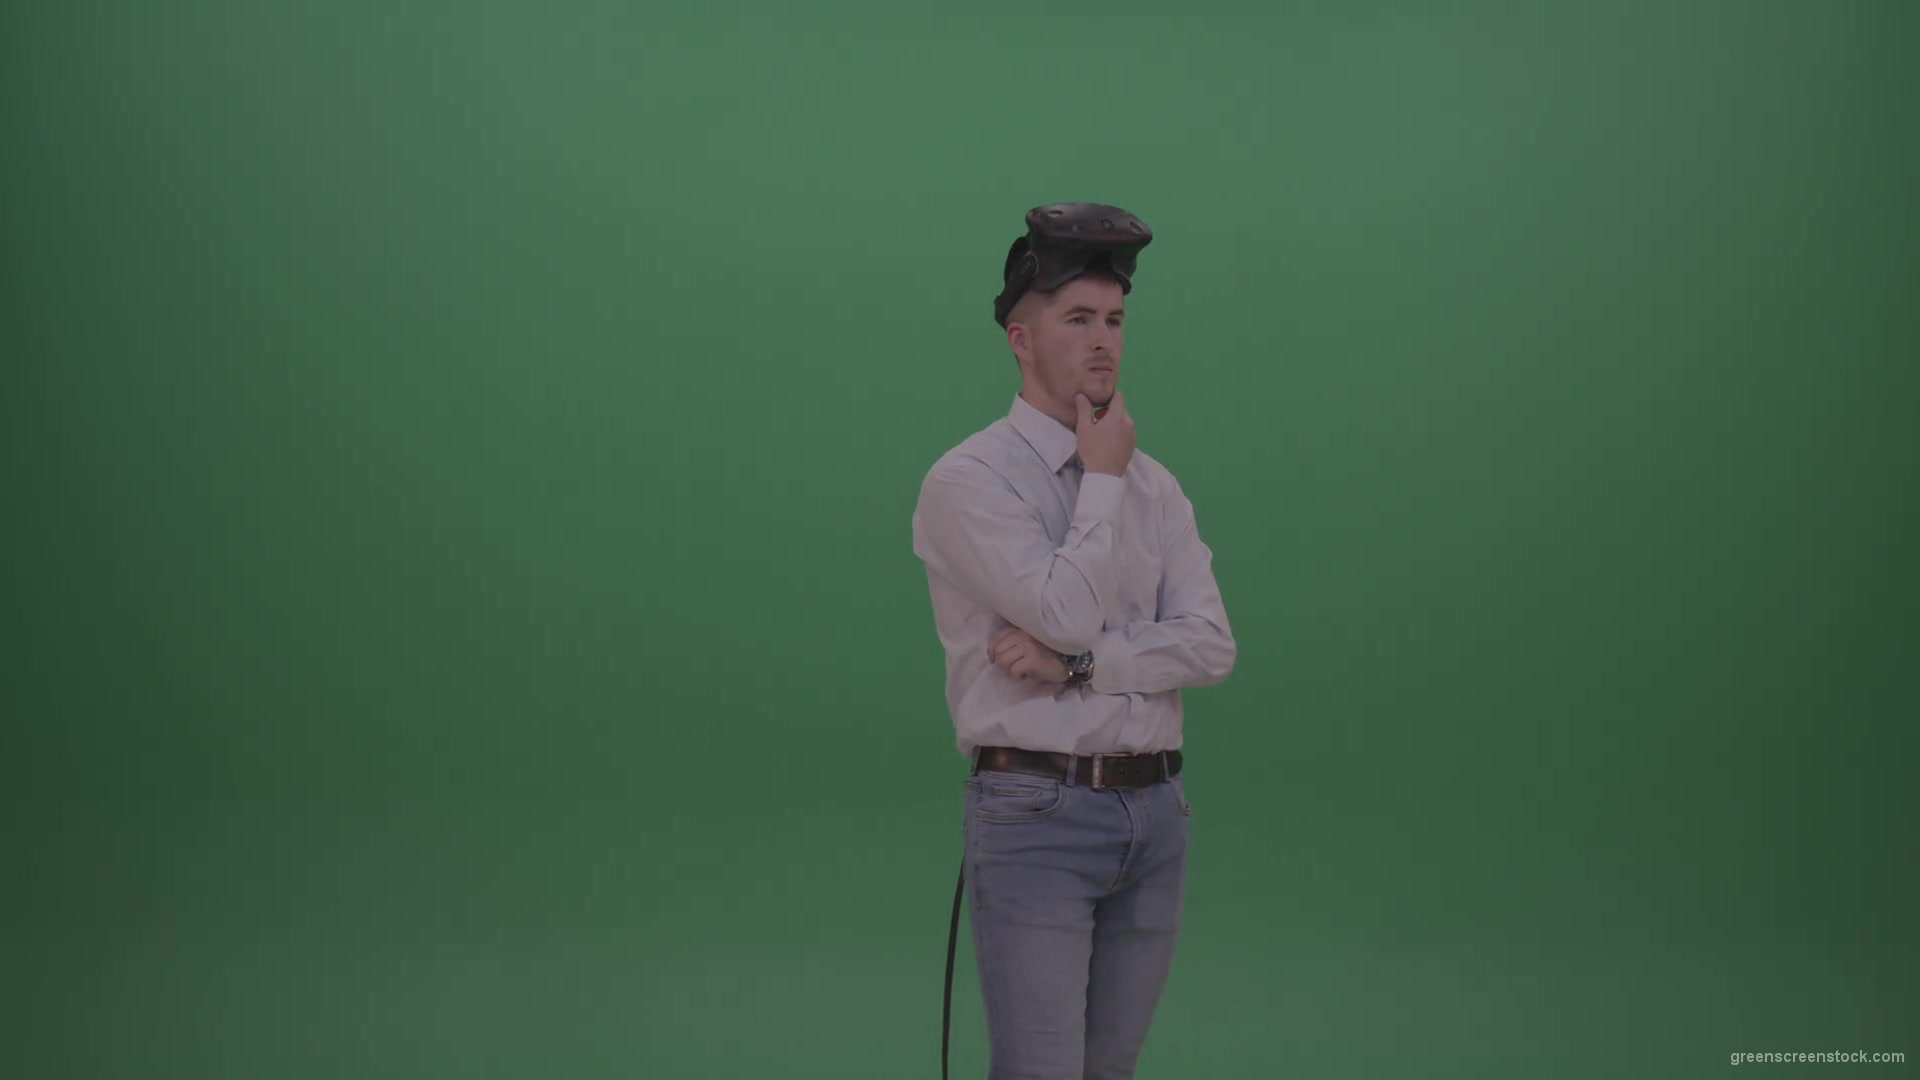 Young_Man_Wearing_White_Shirt_Making_Hard_Decision_Using_Virtual_Glasses_To_Solve_The_Task_Green_Screen_Wall_Chroma_Key_Background-1920_002 Green Screen Stock